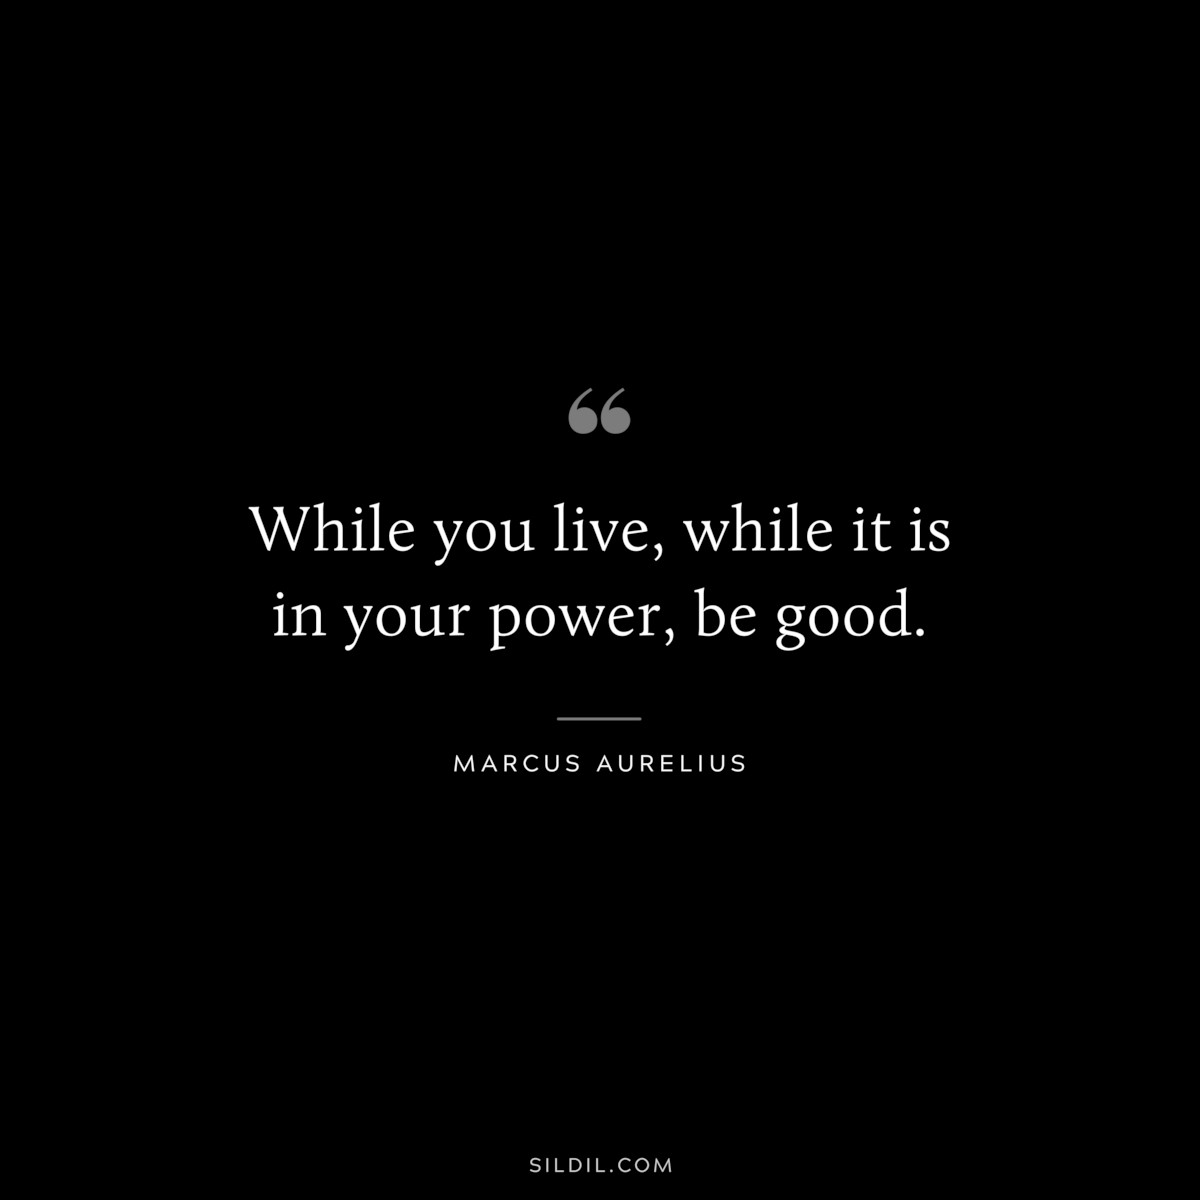 While you live, while it is in your power, be good. ― Marcus Aurelius